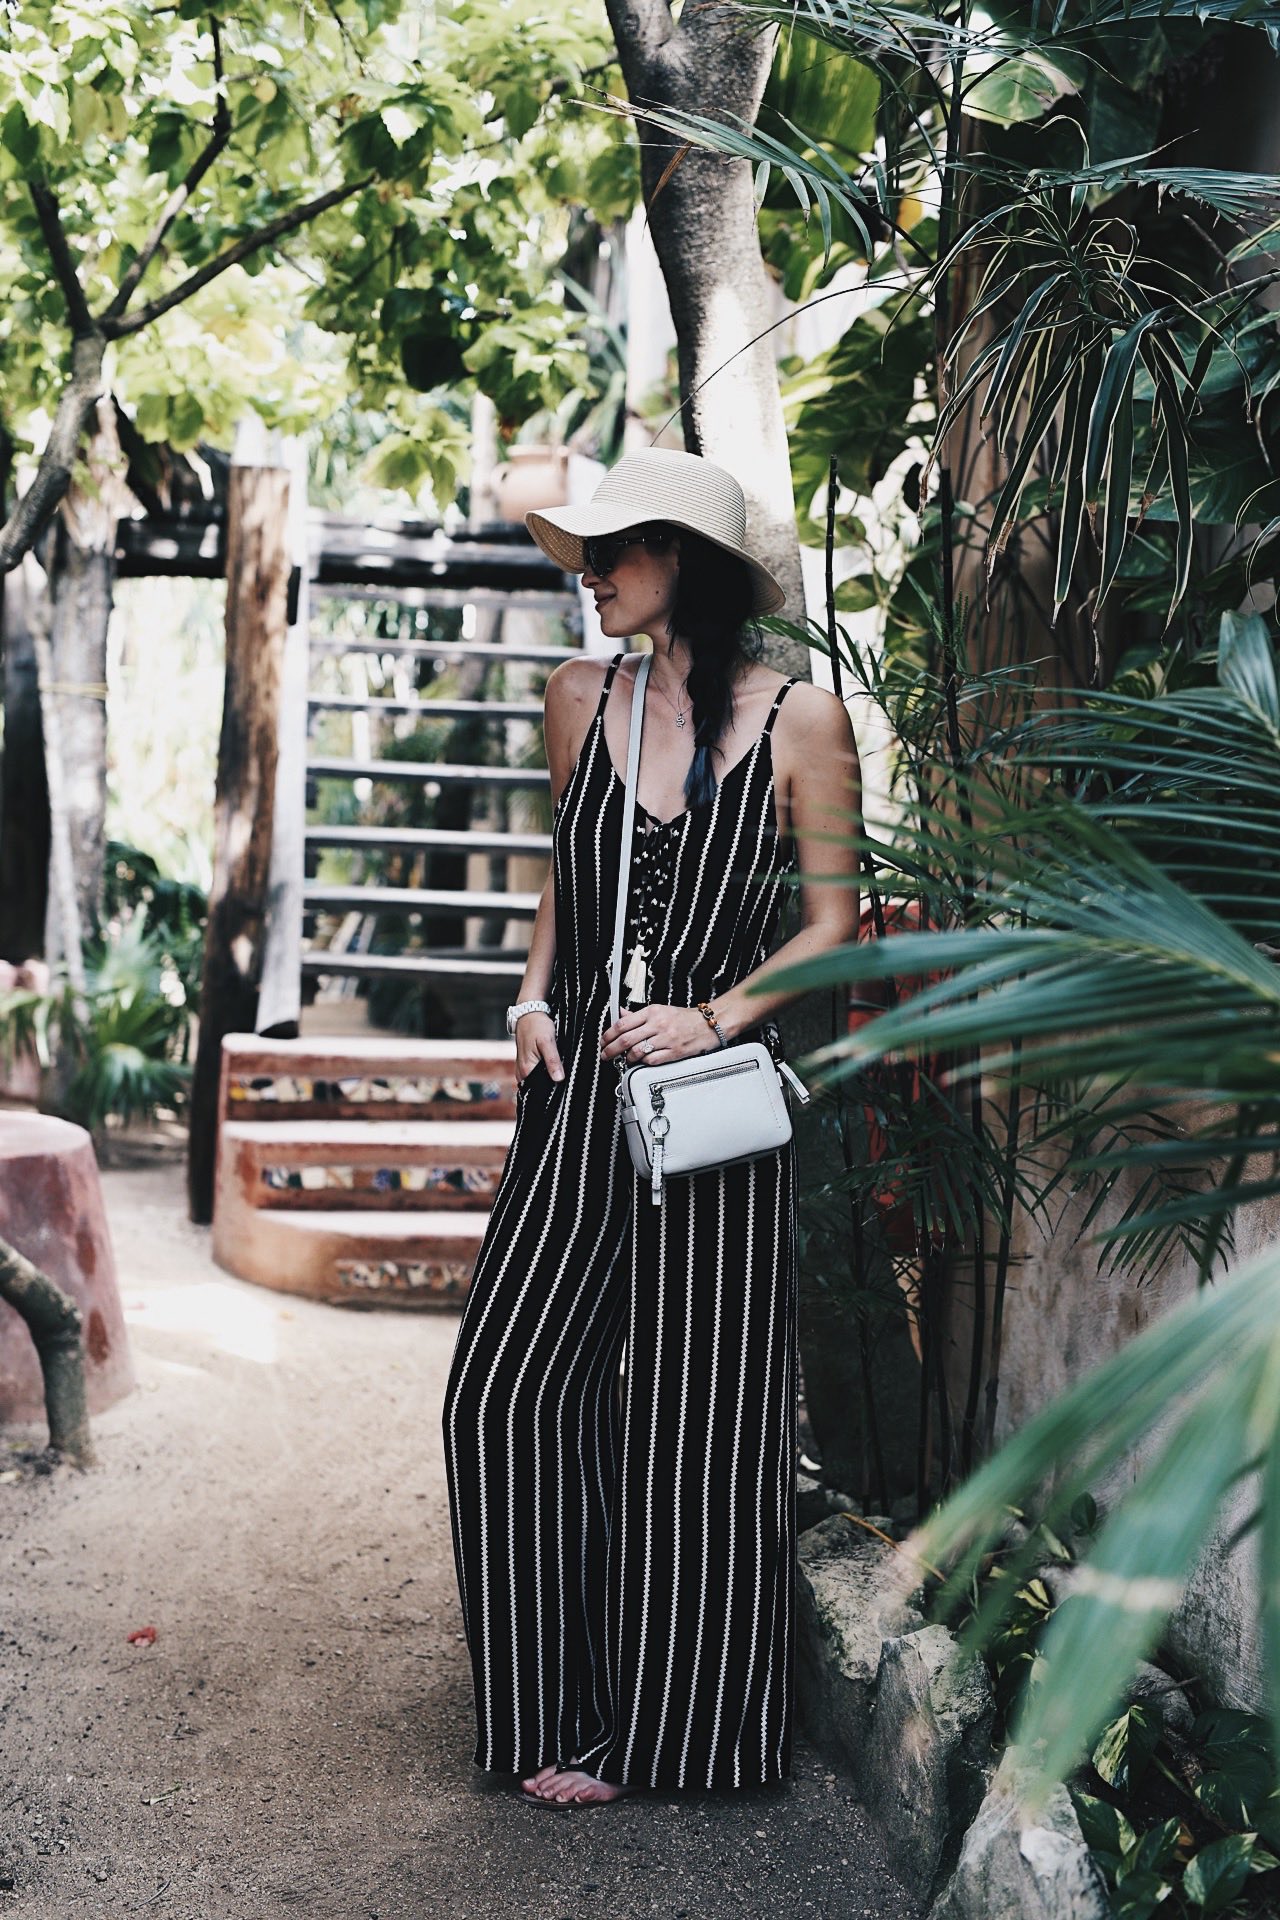 DTKAustin shares some of her recent photos from Tulum, Mexico with ideas on what to wear to beat the heat in the jungle or on the beach. Jumpsuit from Wala Swim, Bag from Henri Bendel. Click for more images and information. | how to style a jumpsuit | how to wear a jumpsuit | jumpsuit styling tips | summer fashion tips | summer outfit ideas | summer style tips | what to wear for summer | warm weather fashion | fashion for summer | style tips for summer | outfit ideas for summer || Dressed to Kill